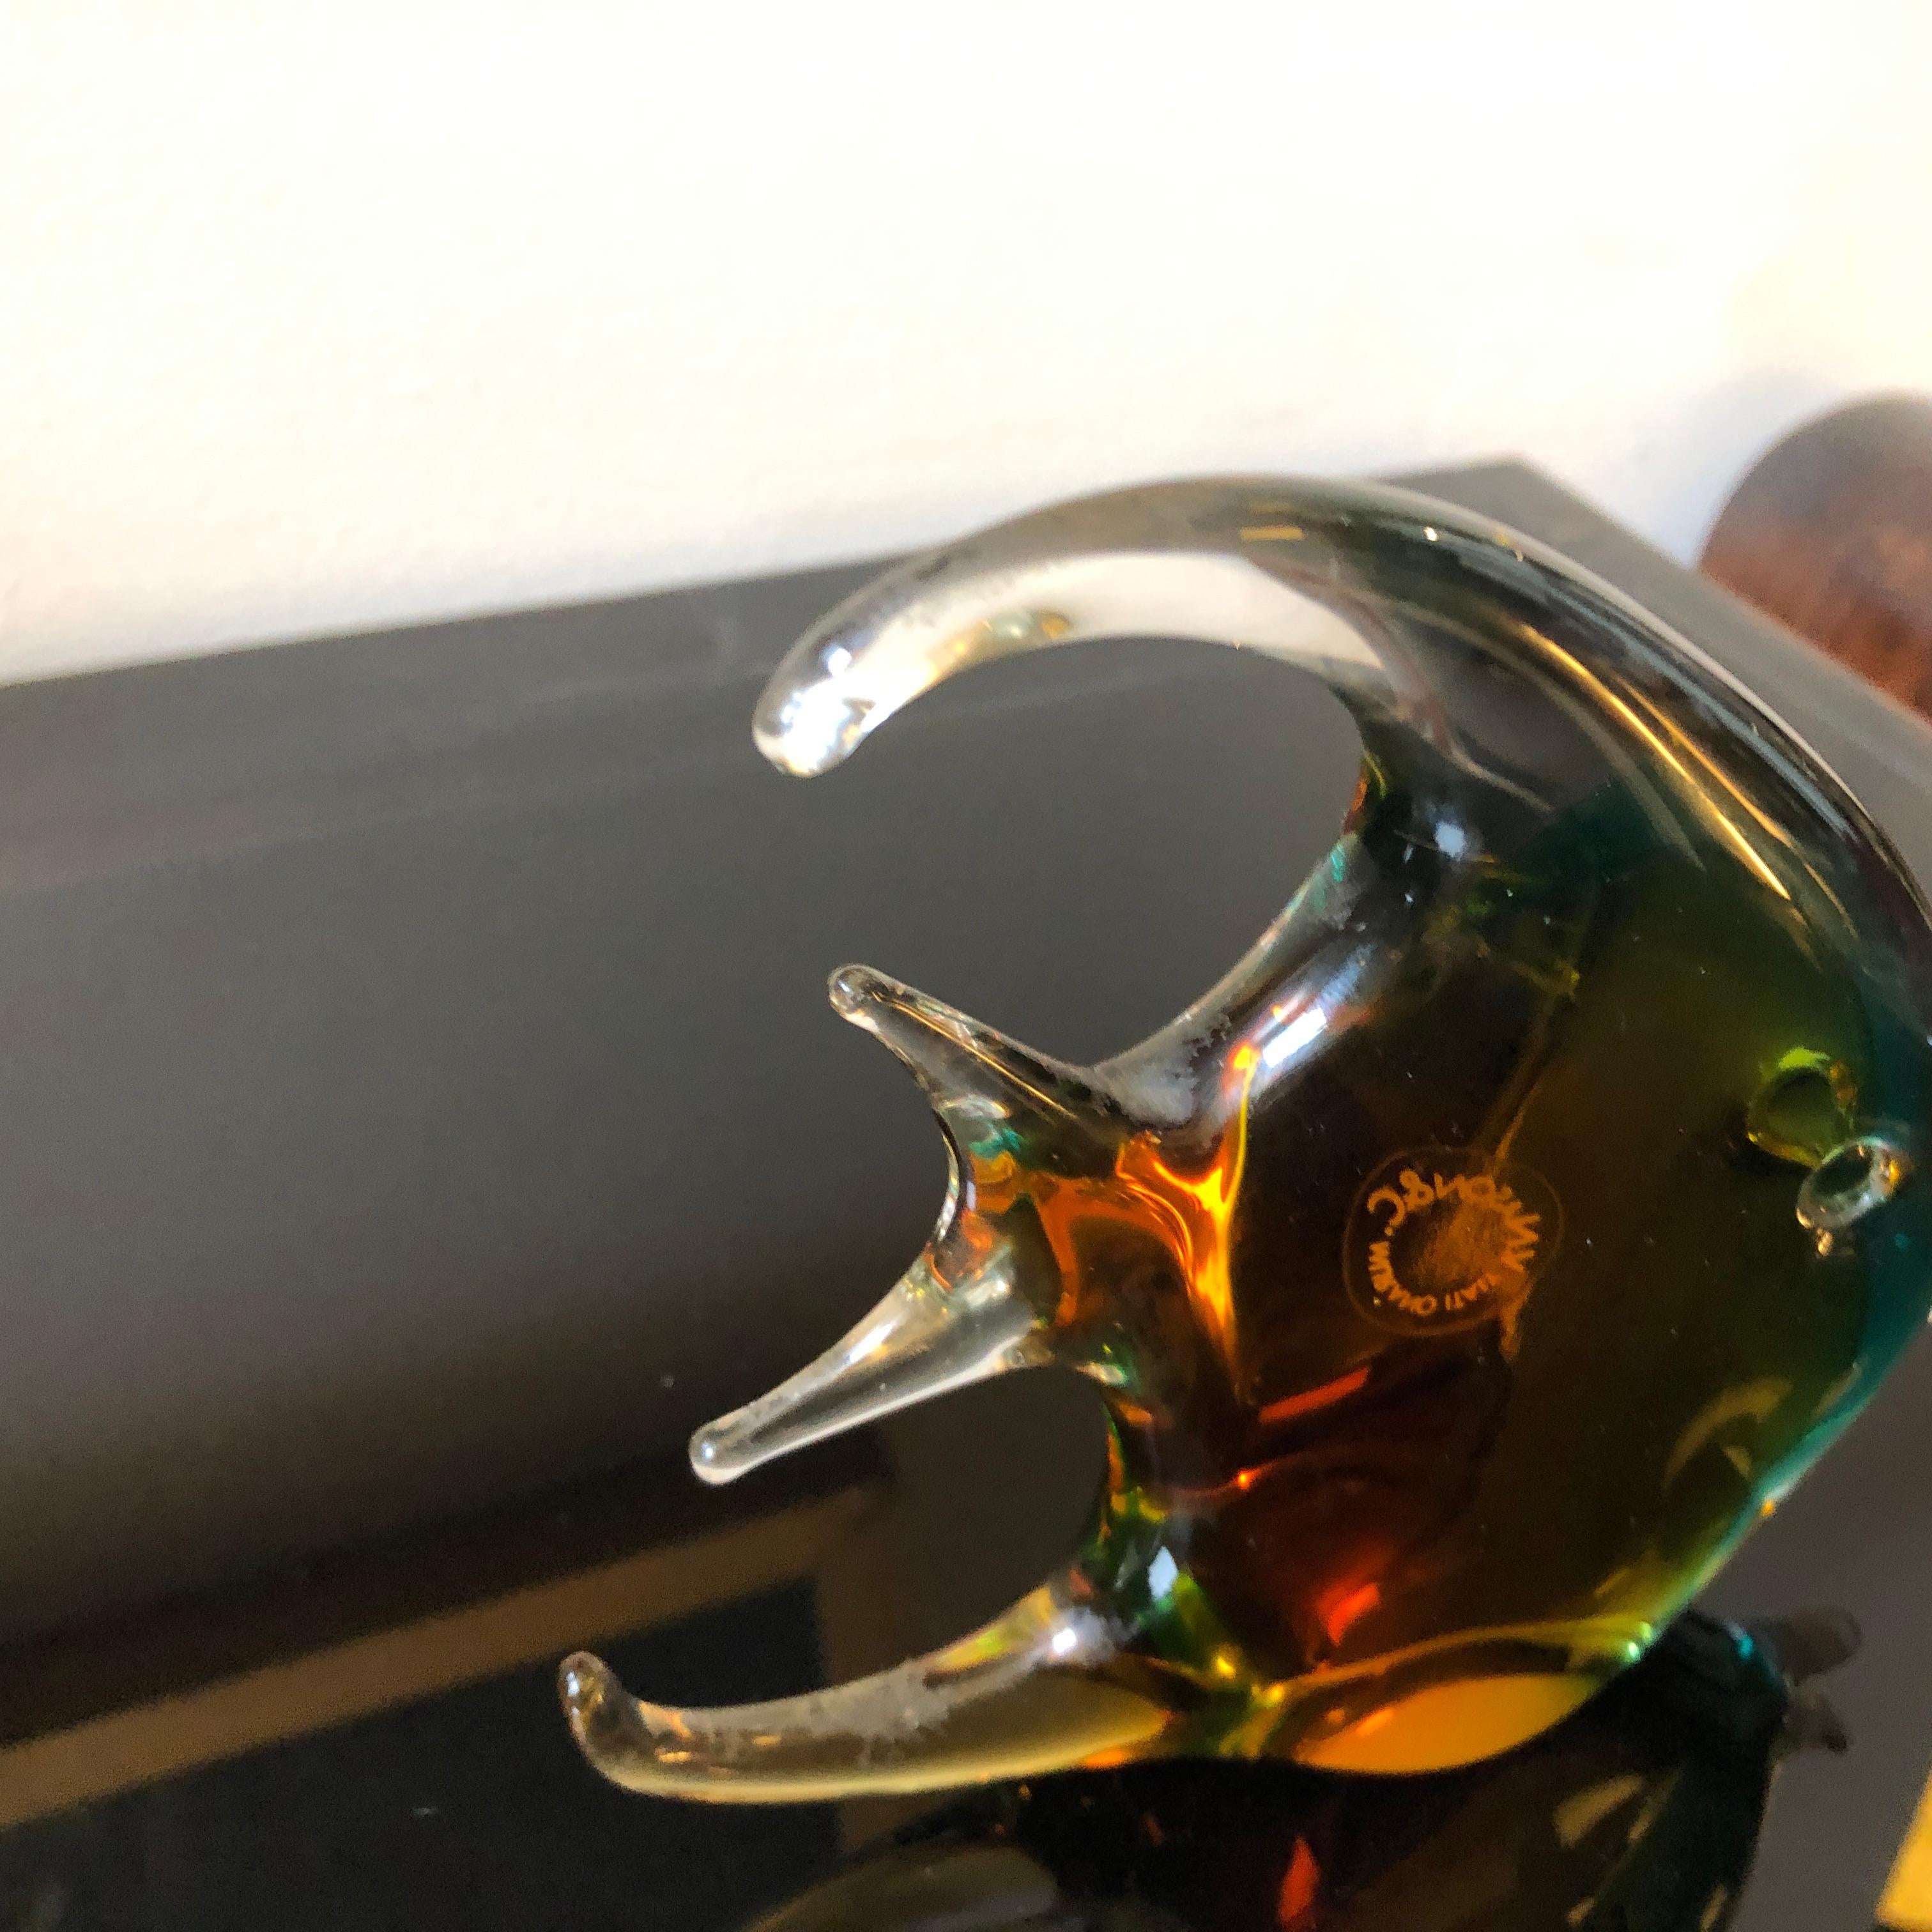 A green and brown Murano glass fish by Nason made in the 1970s. It's in perfect conditions.